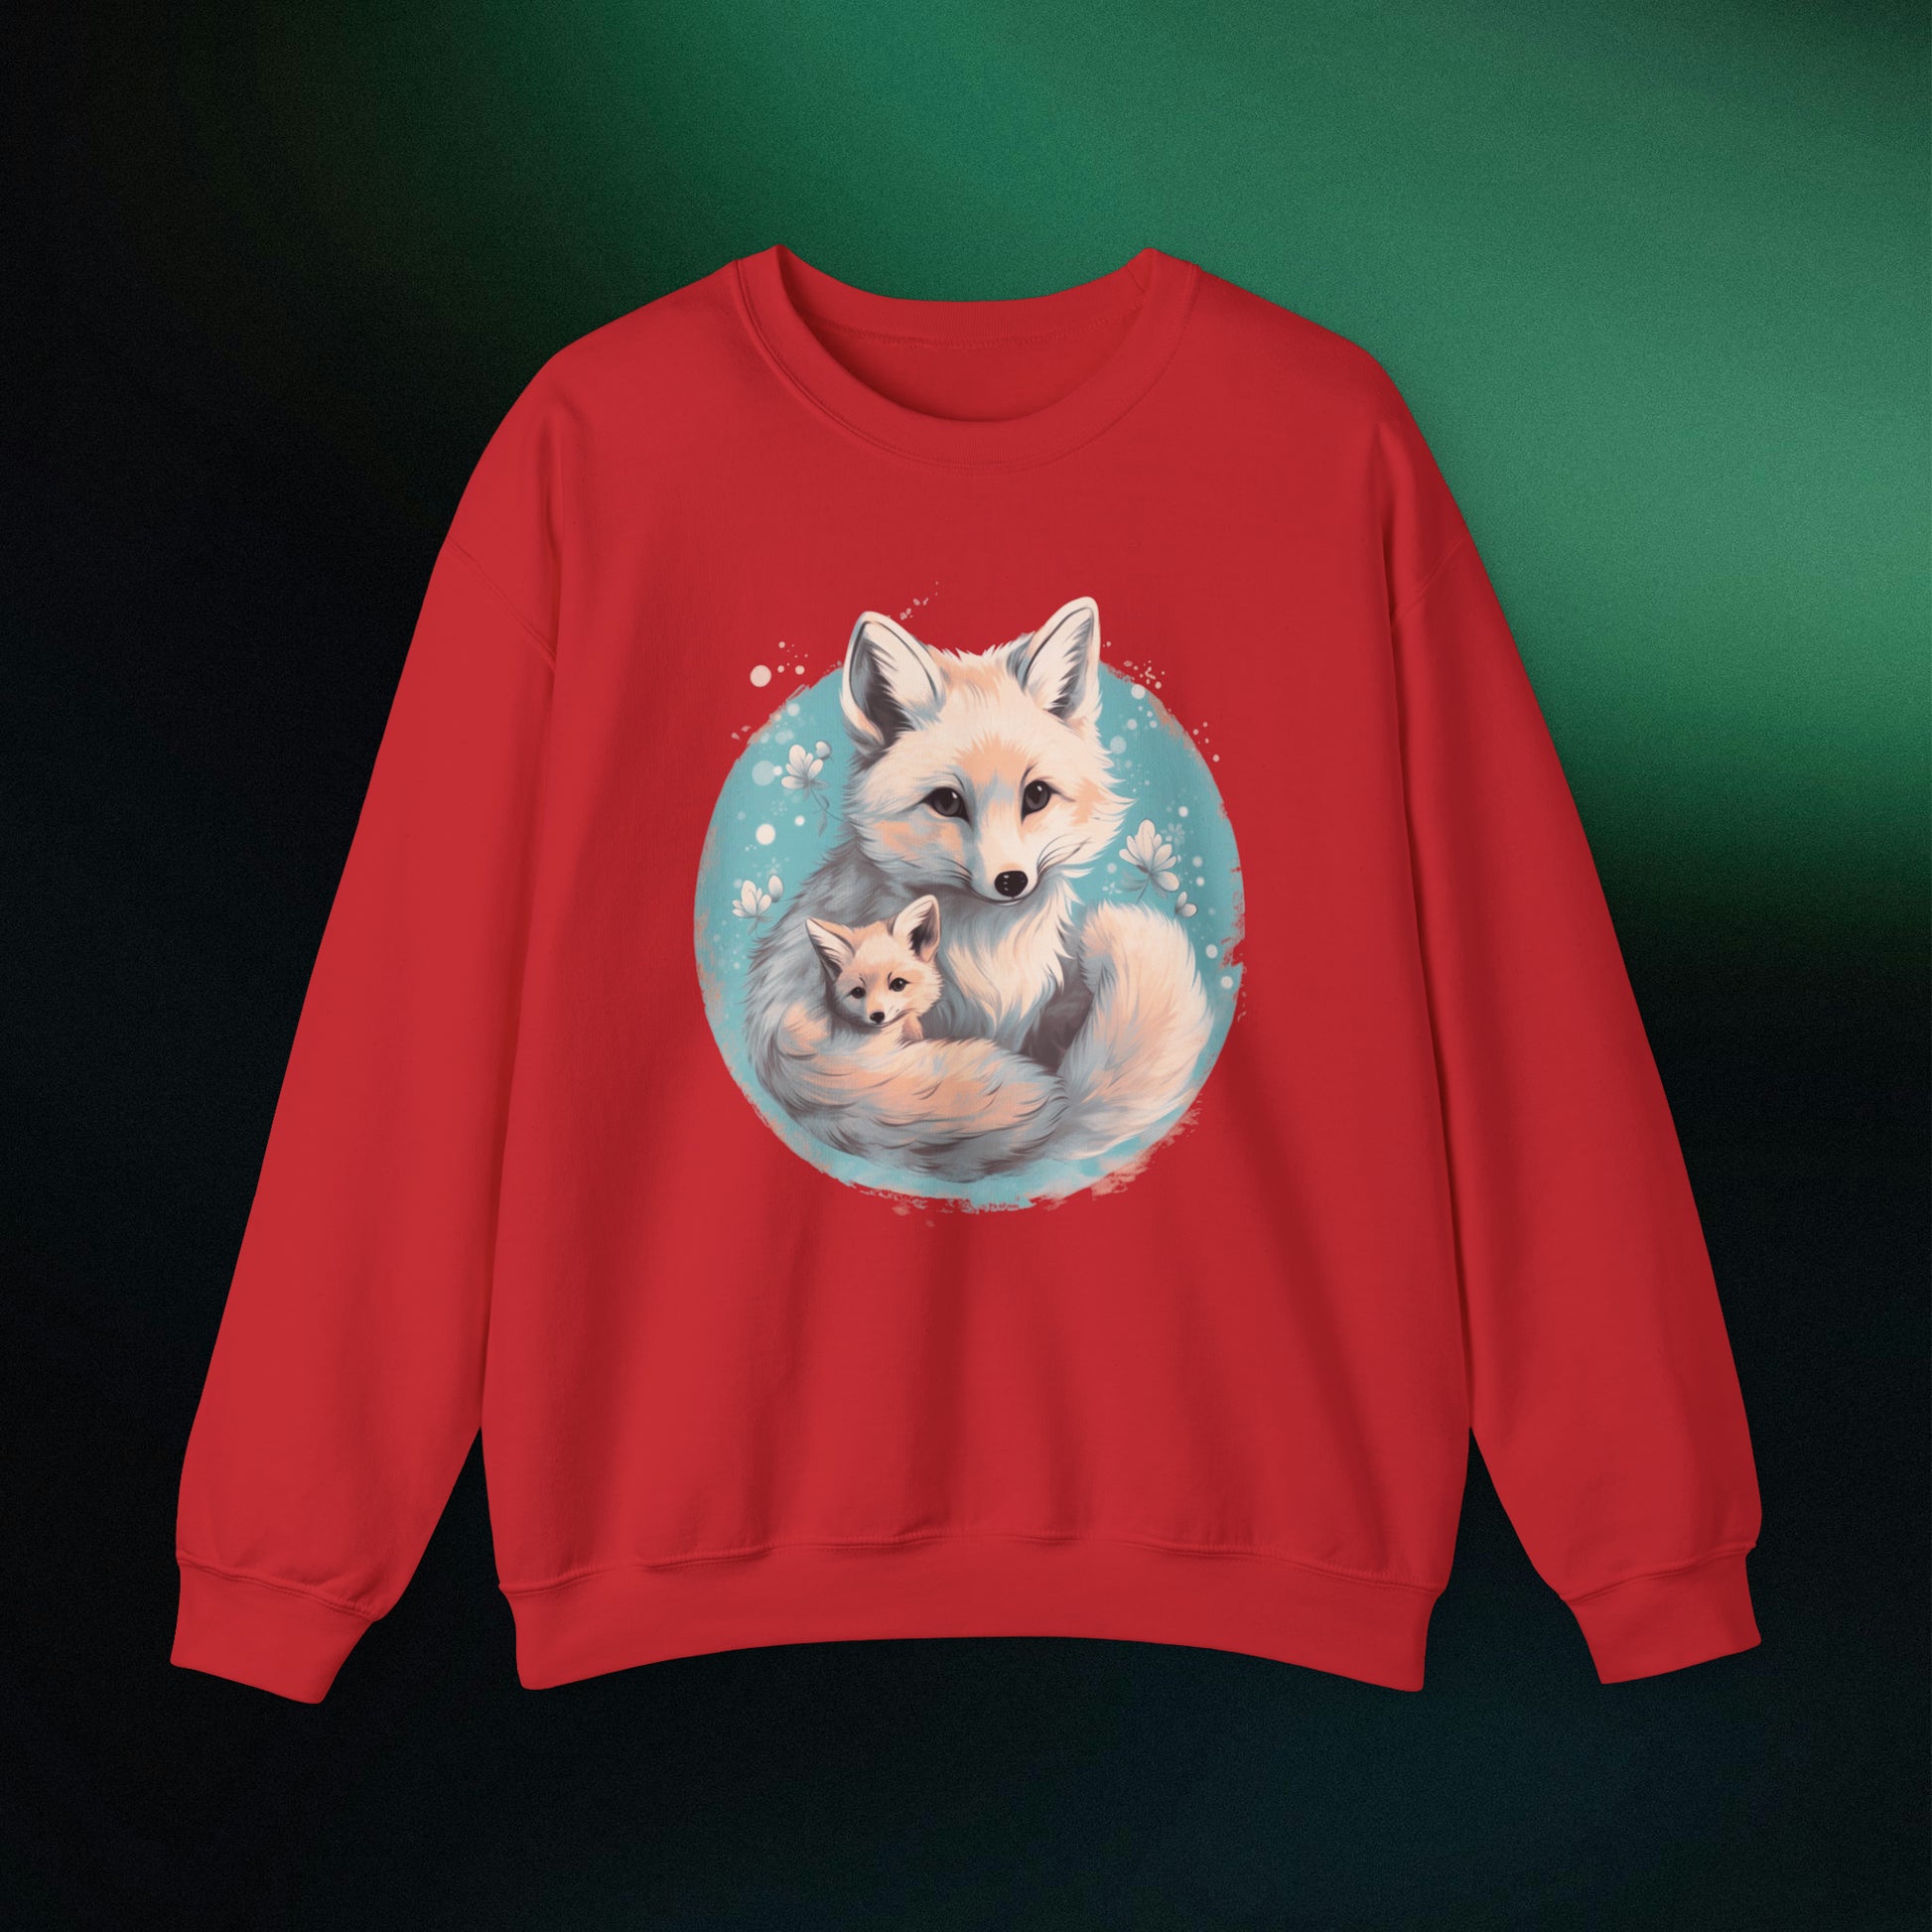 Vintage Forest Witch Aesthetic Sweatshirt - Cozy Fox Cottagecore Sweater with Mommy and Baby Fox Design Sweatshirt S Red 